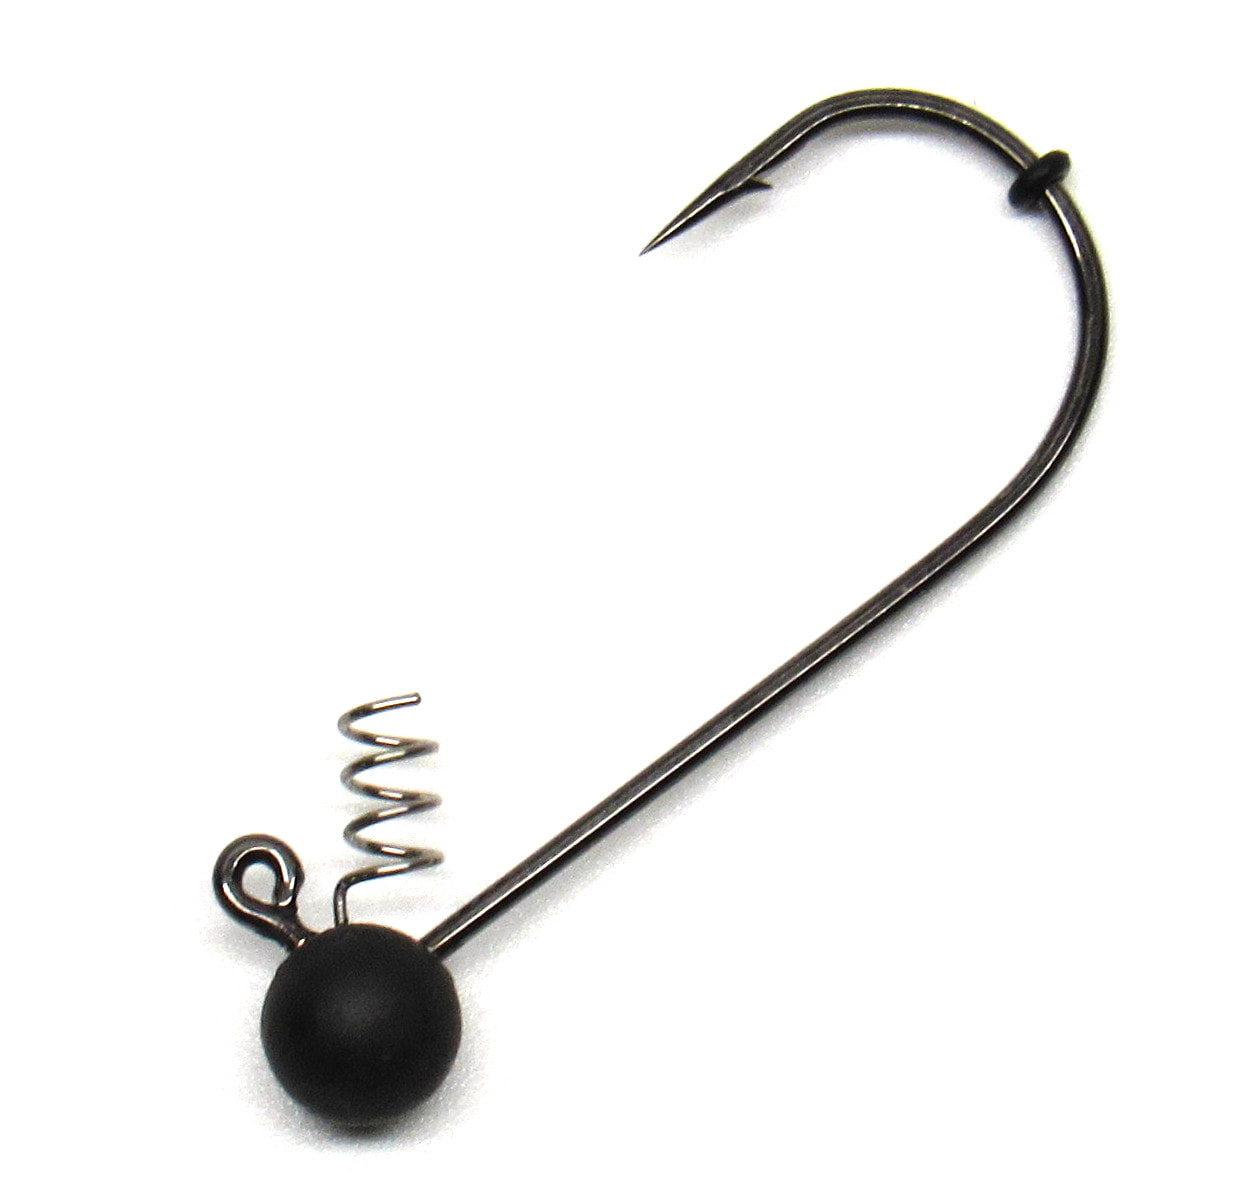 ATUENO 5pcs Shakey Jig Head Weighted Hooks for Bass Fishing